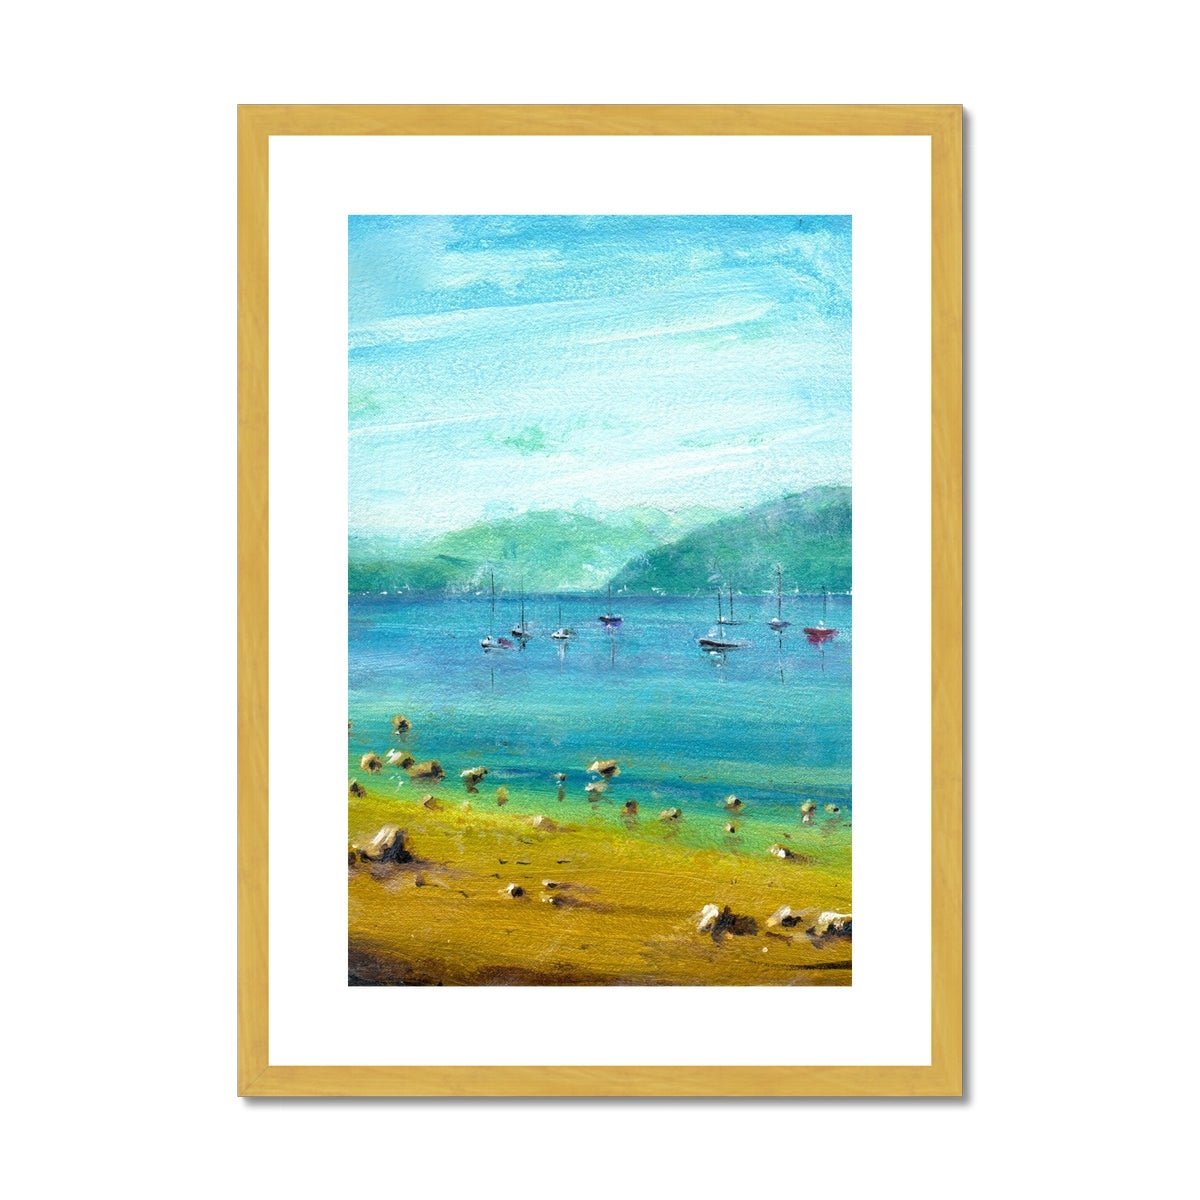 A Summer Day On The Clyde Painting | Antique Framed & Mounted Prints From Scotland-Antique Framed & Mounted Prints-River Clyde Art Gallery-A2 Portrait-Gold Frame-Paintings, Prints, Homeware, Art Gifts From Scotland By Scottish Artist Kevin Hunter